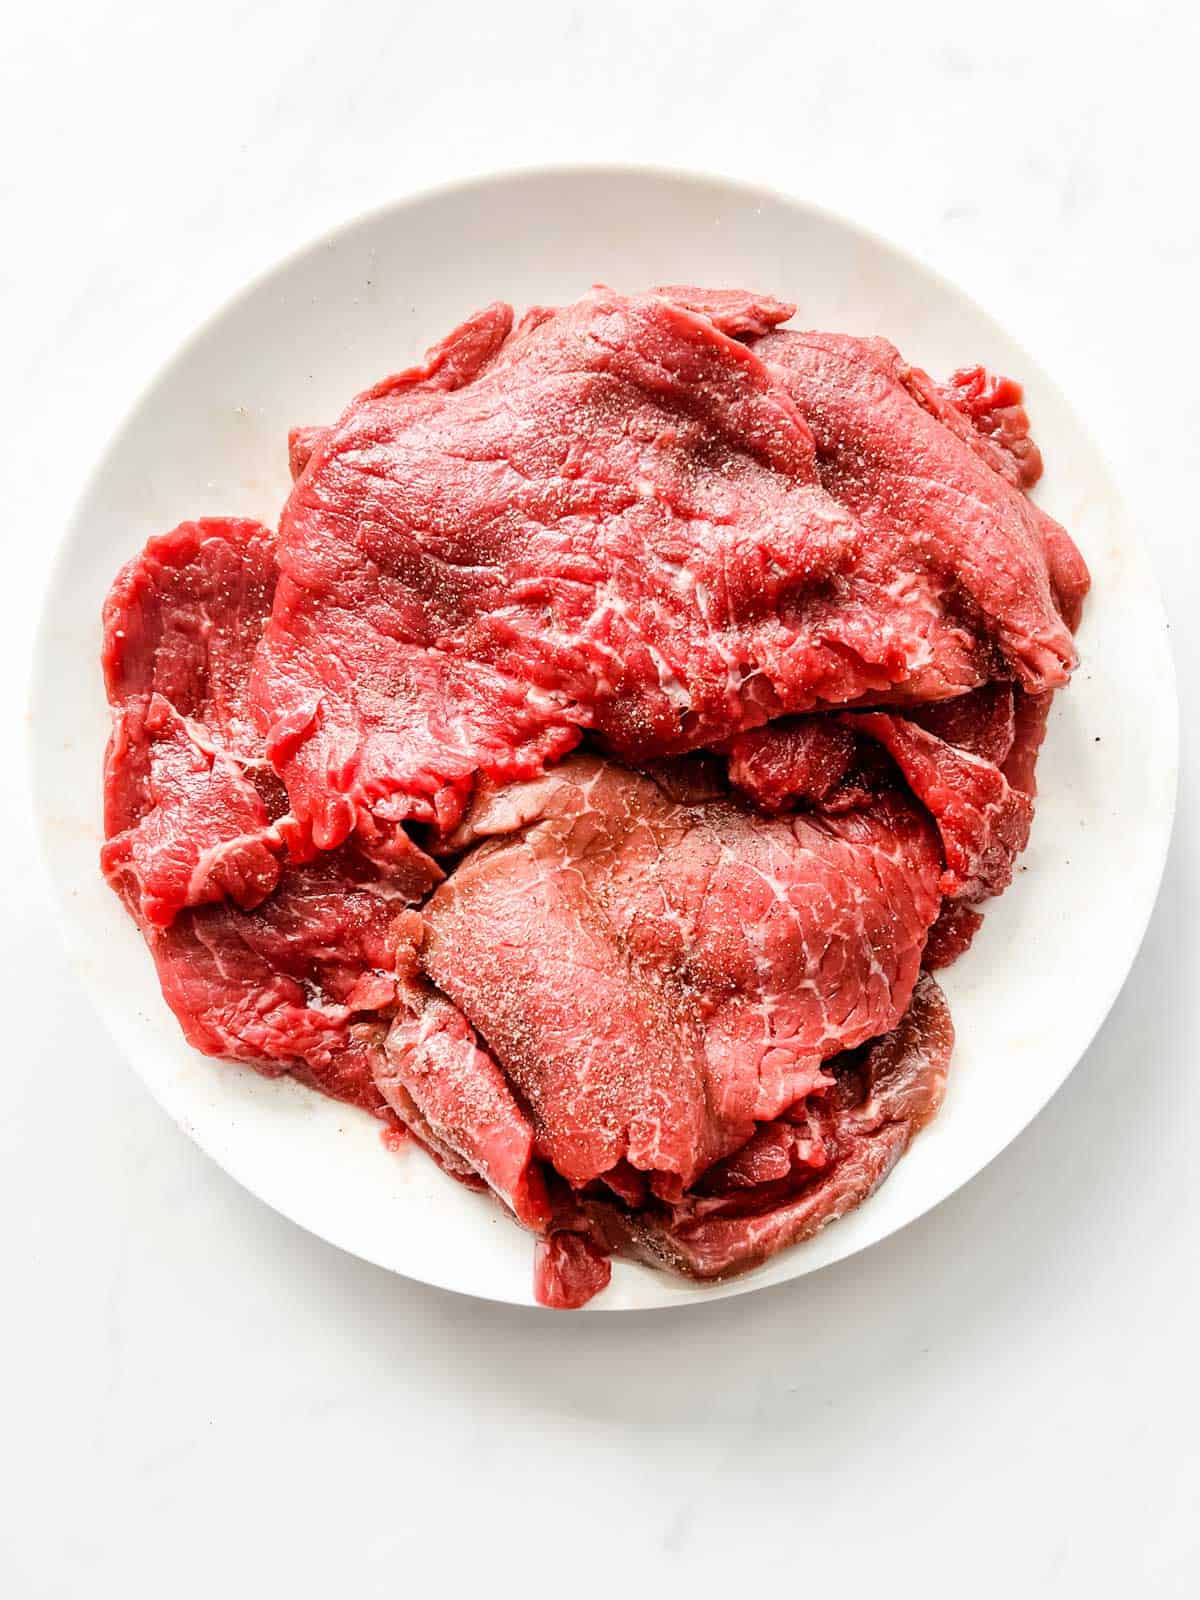 Thinly sliced steak seasoned with salt and pepper.